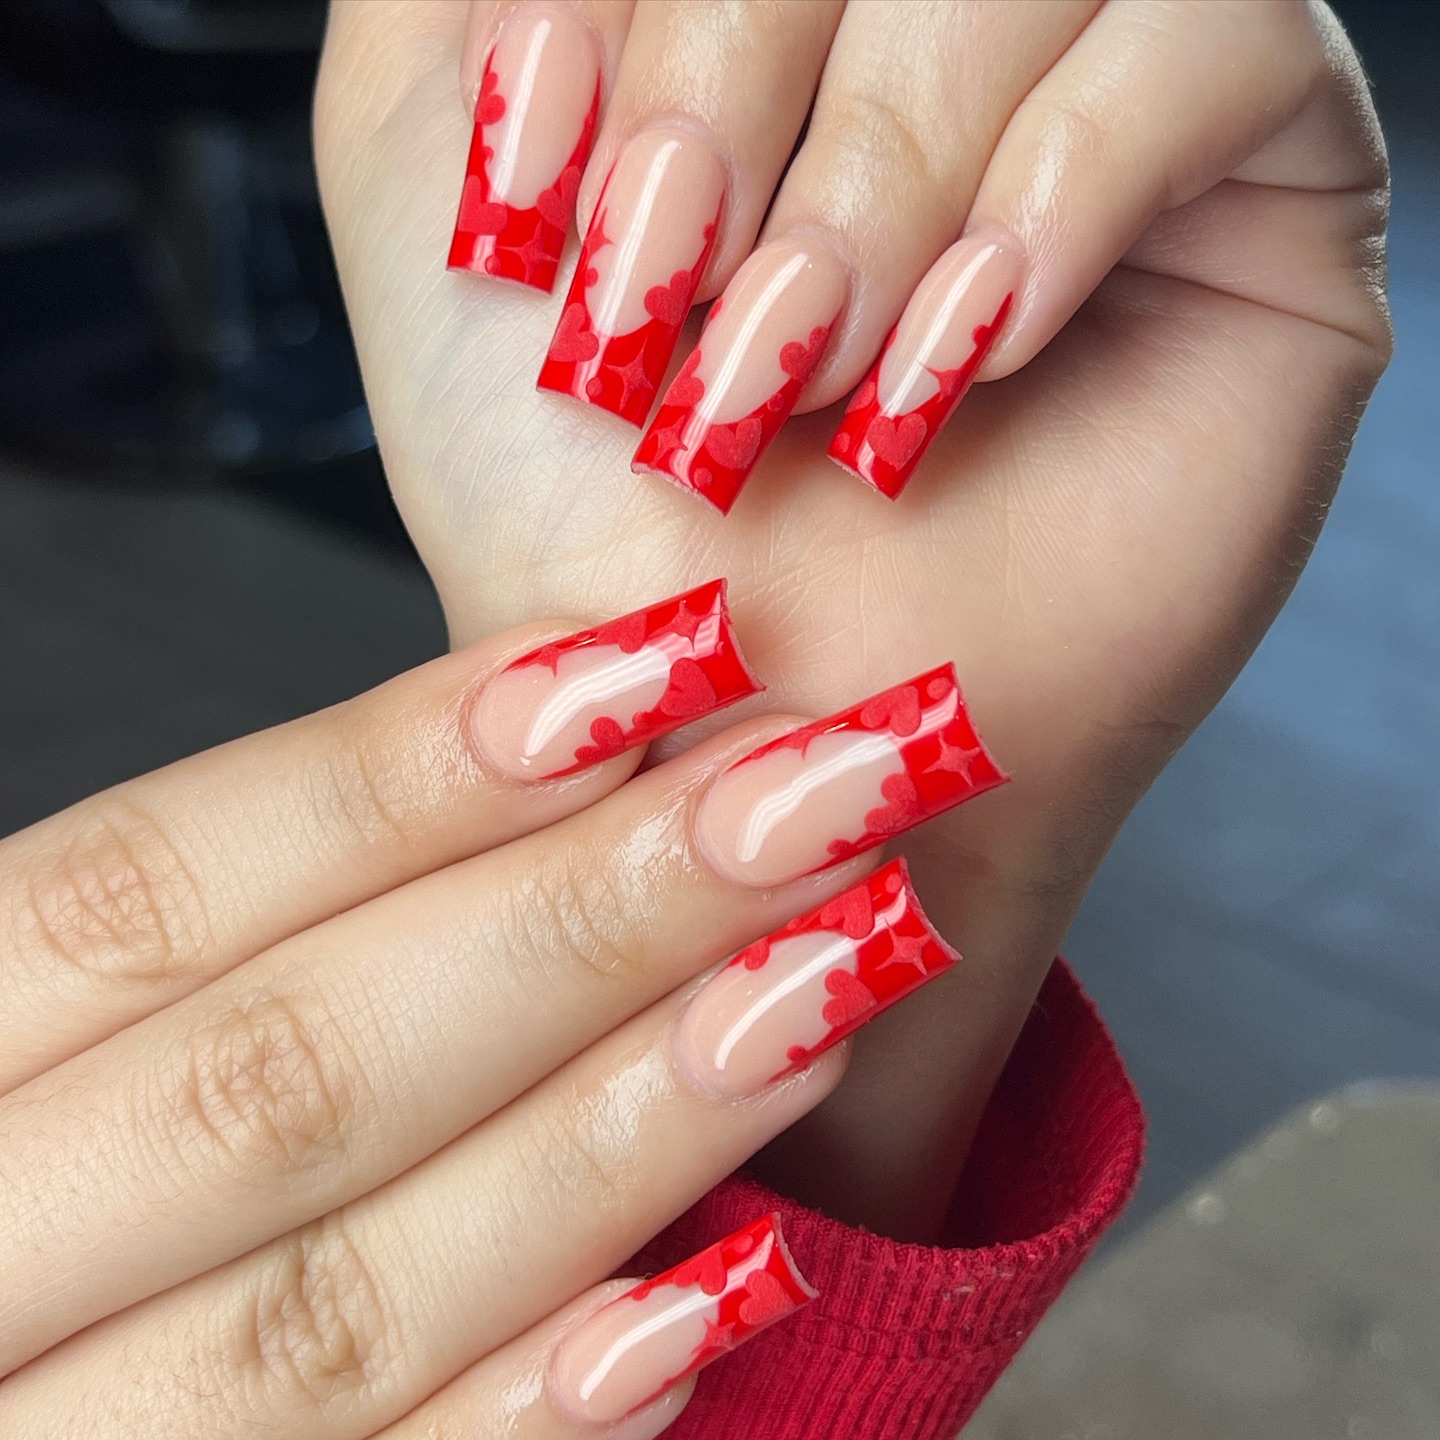 Red French Tips With Heart Shapes